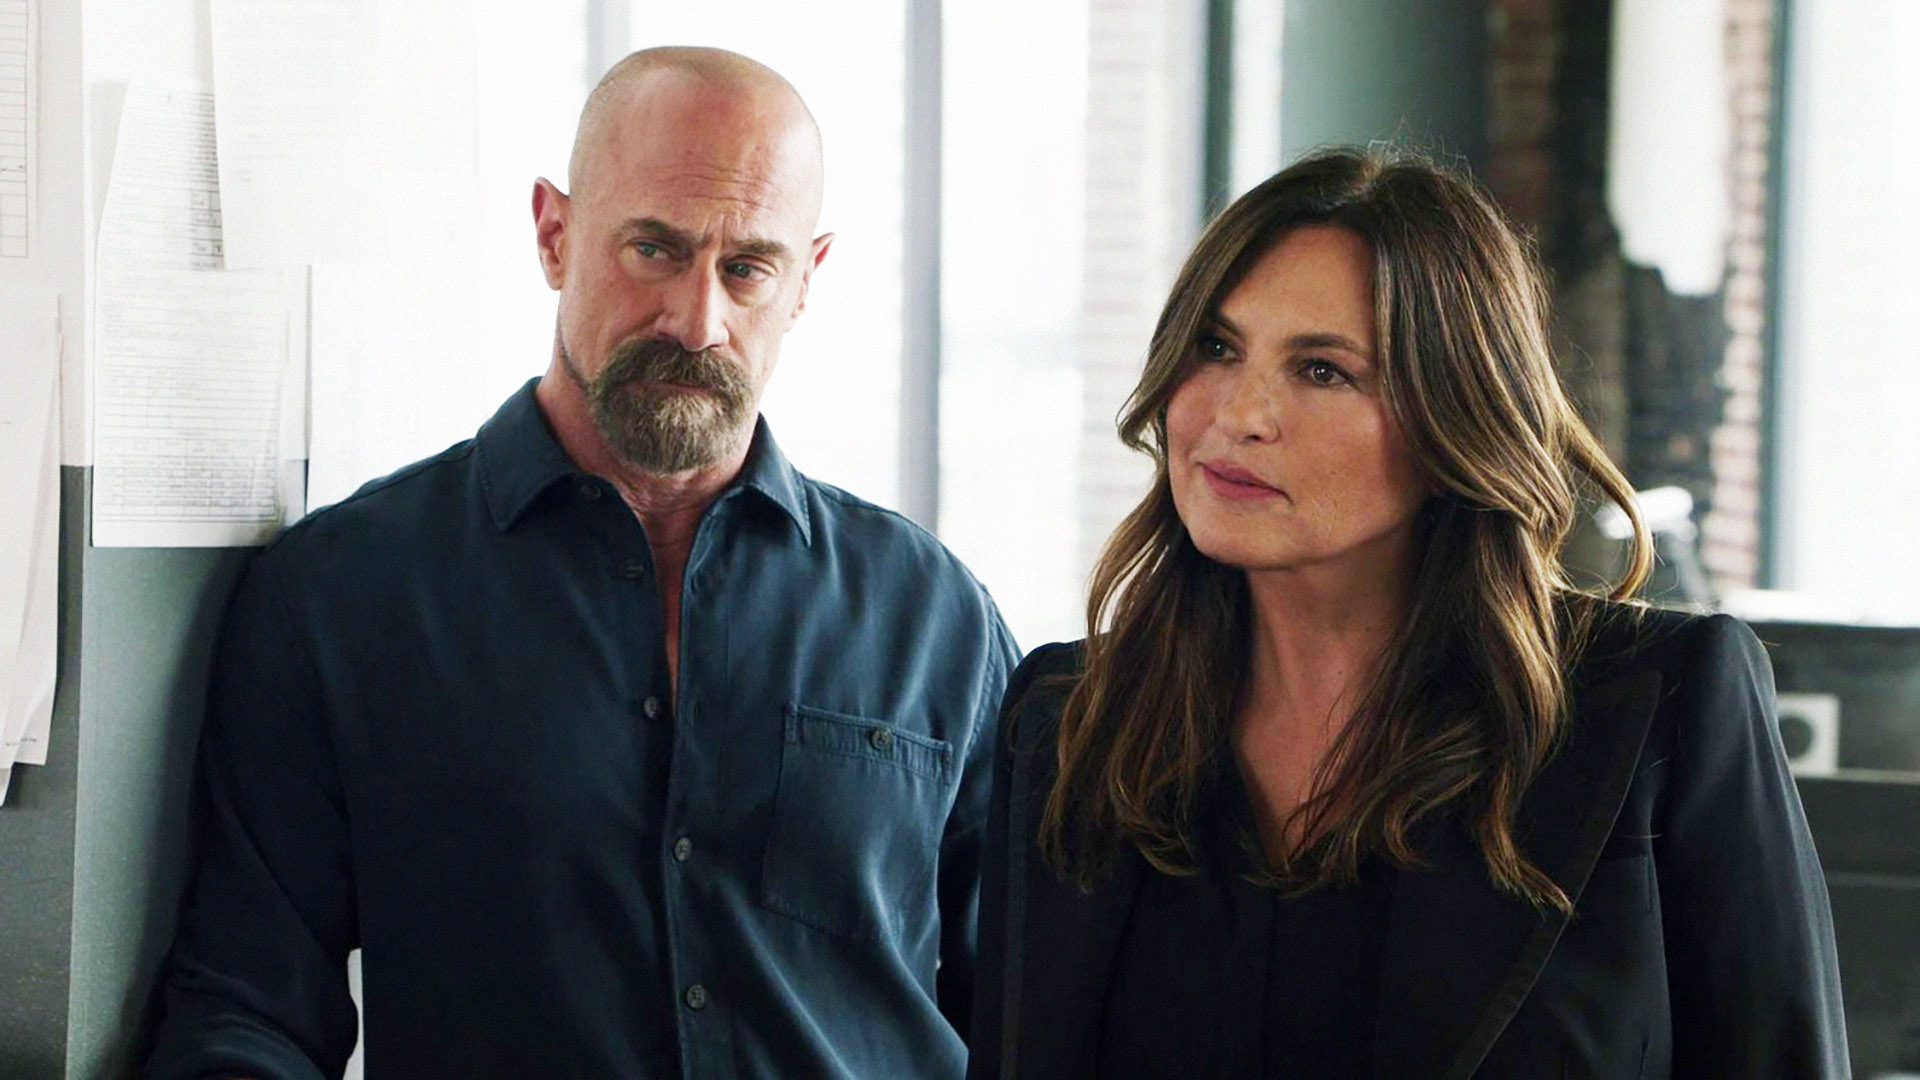 SVU & Organized Crime May 18 Crossover Finale Has Benson & Stabler Working Together